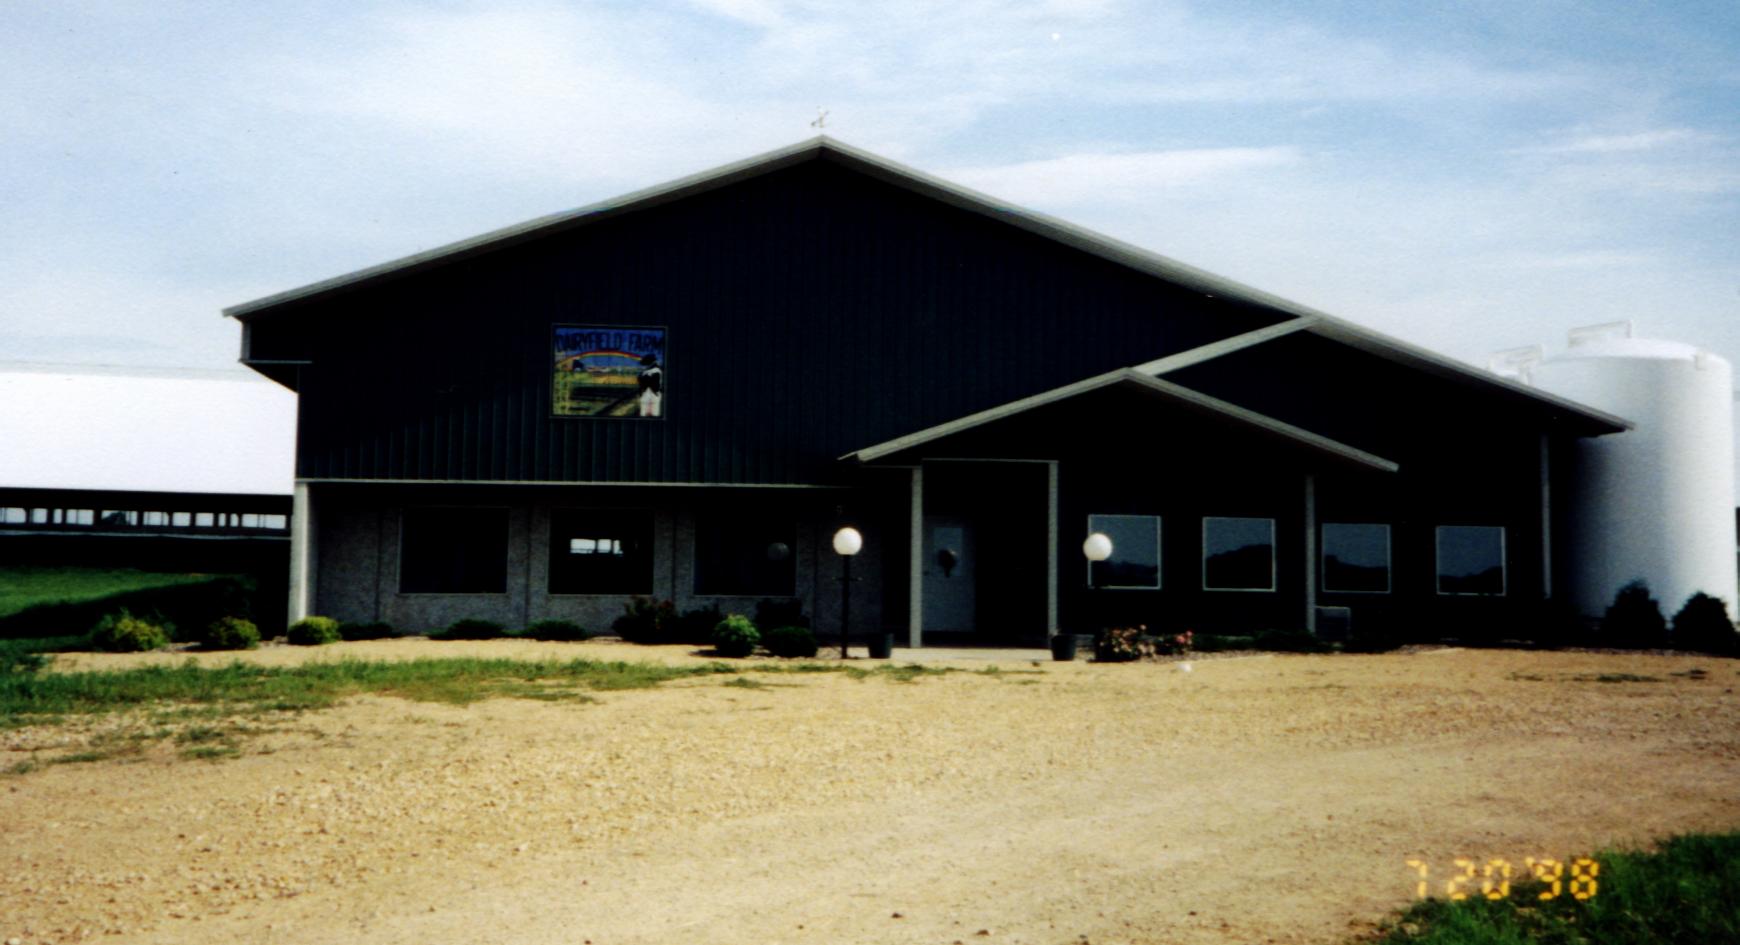 Click here to start your fun tour of Dairyfield Farm, this is the front of the dairy center.